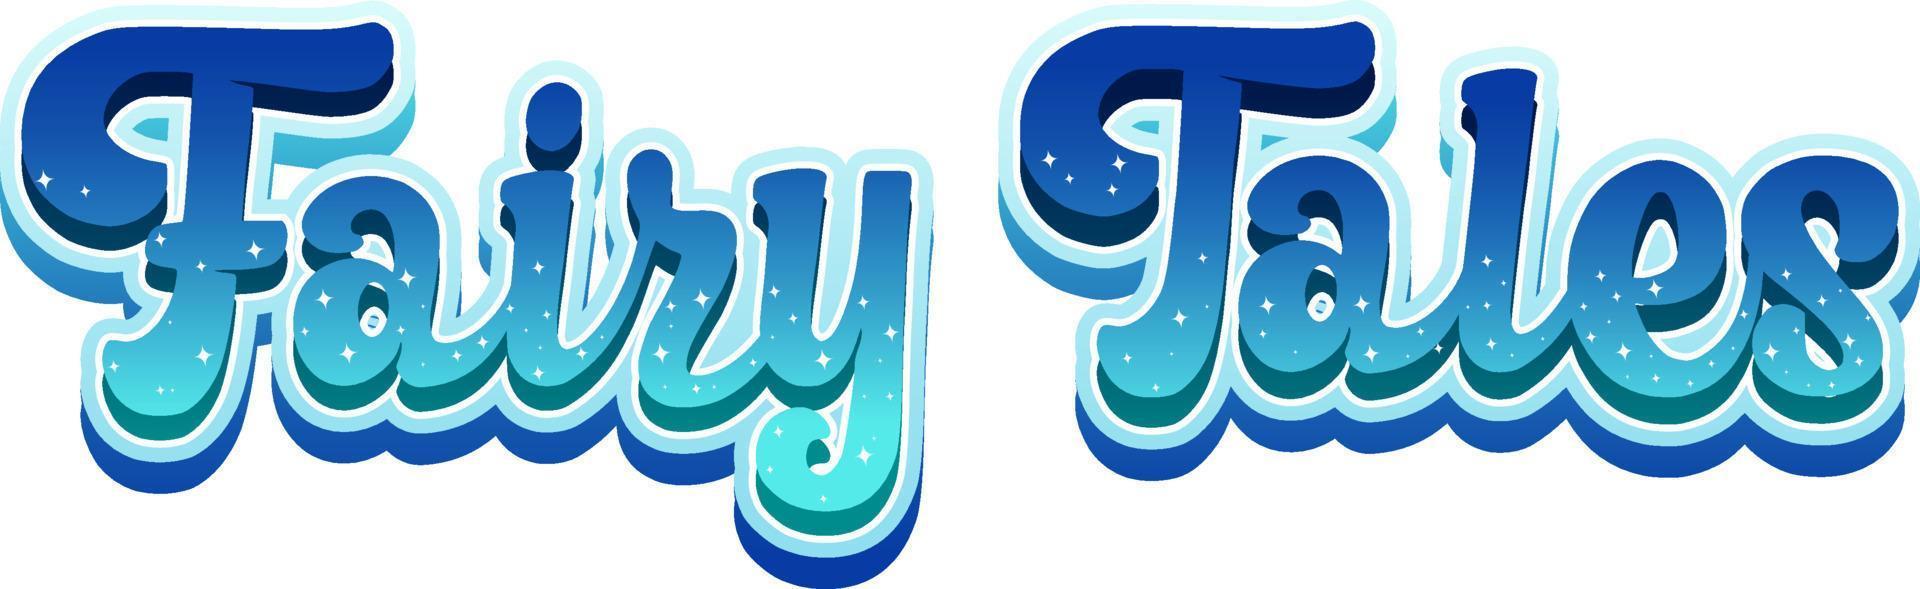 Fantasy Land text word with blue gradient vector